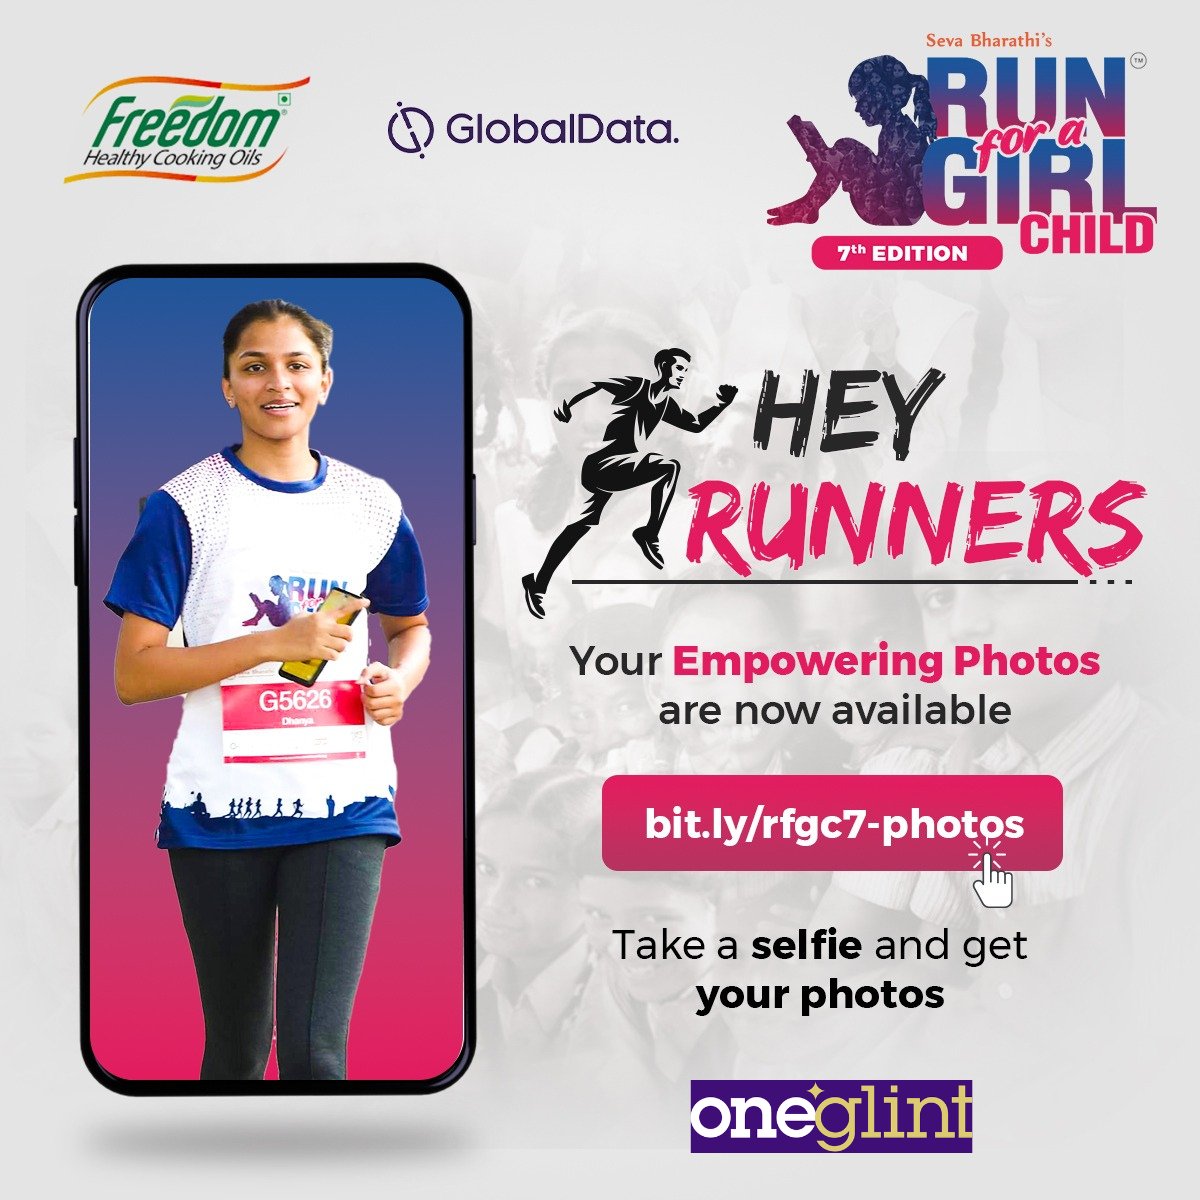 Thank you to all the runners! 
You can now download your run photos from bit.ly/rfgc7-photos using the #selfie option. 
Don't forget to tag us [#RunForAGirlChild @sevabharathitg ] and share your amazing moments! 

#runphotos @OneGlint #FreedomHealthyOil #GlobalData